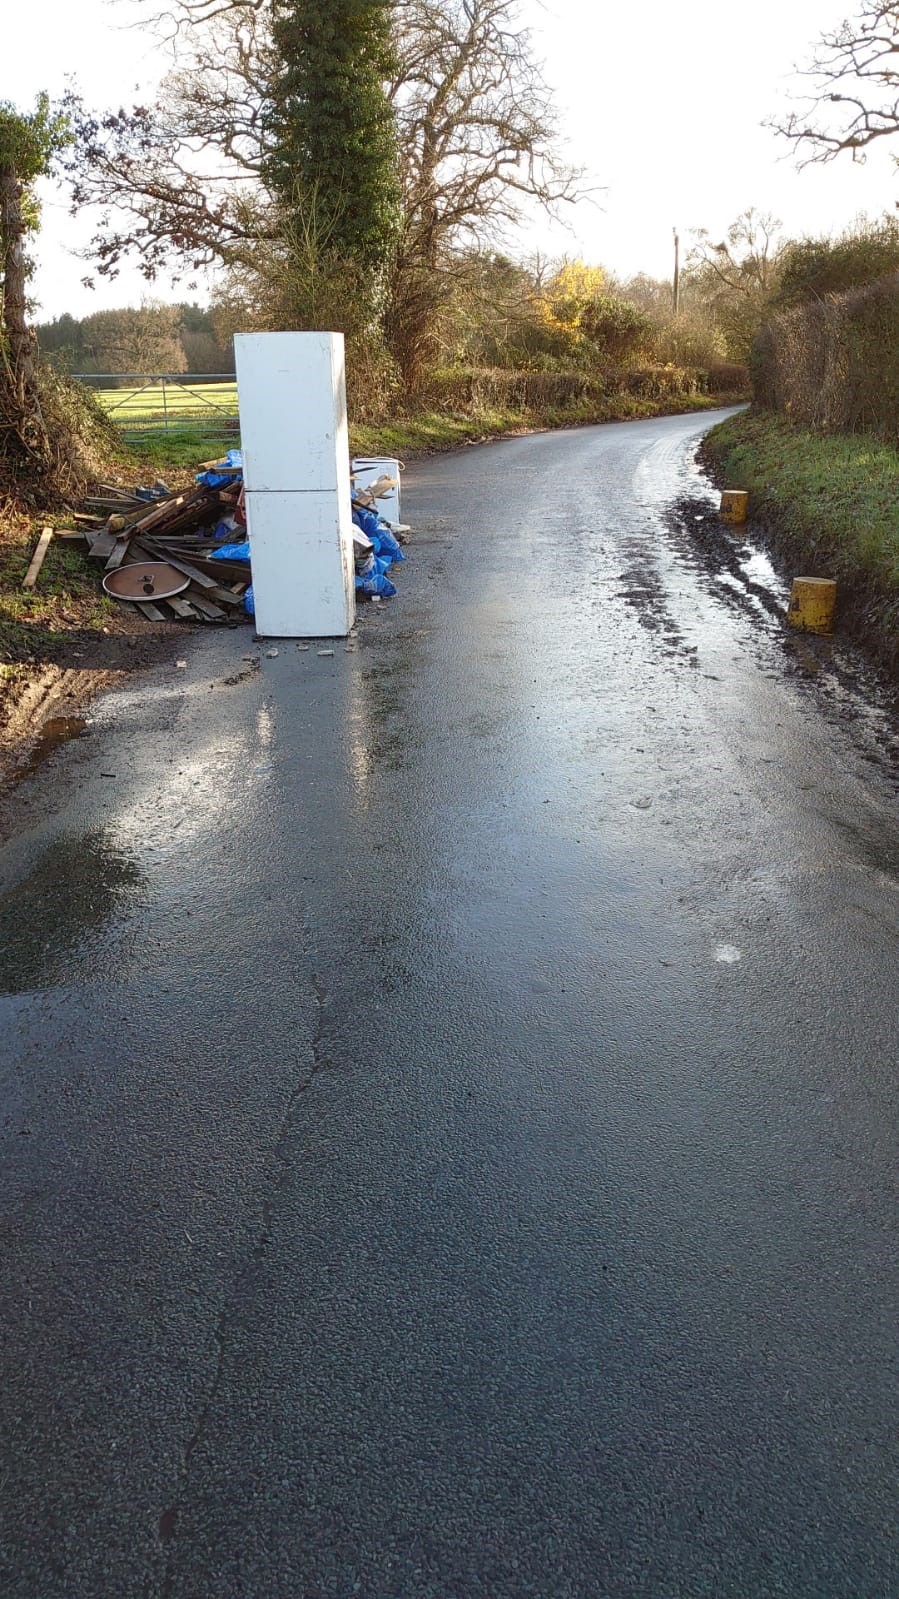 Fridge and rubbish dumped in the road in Birling